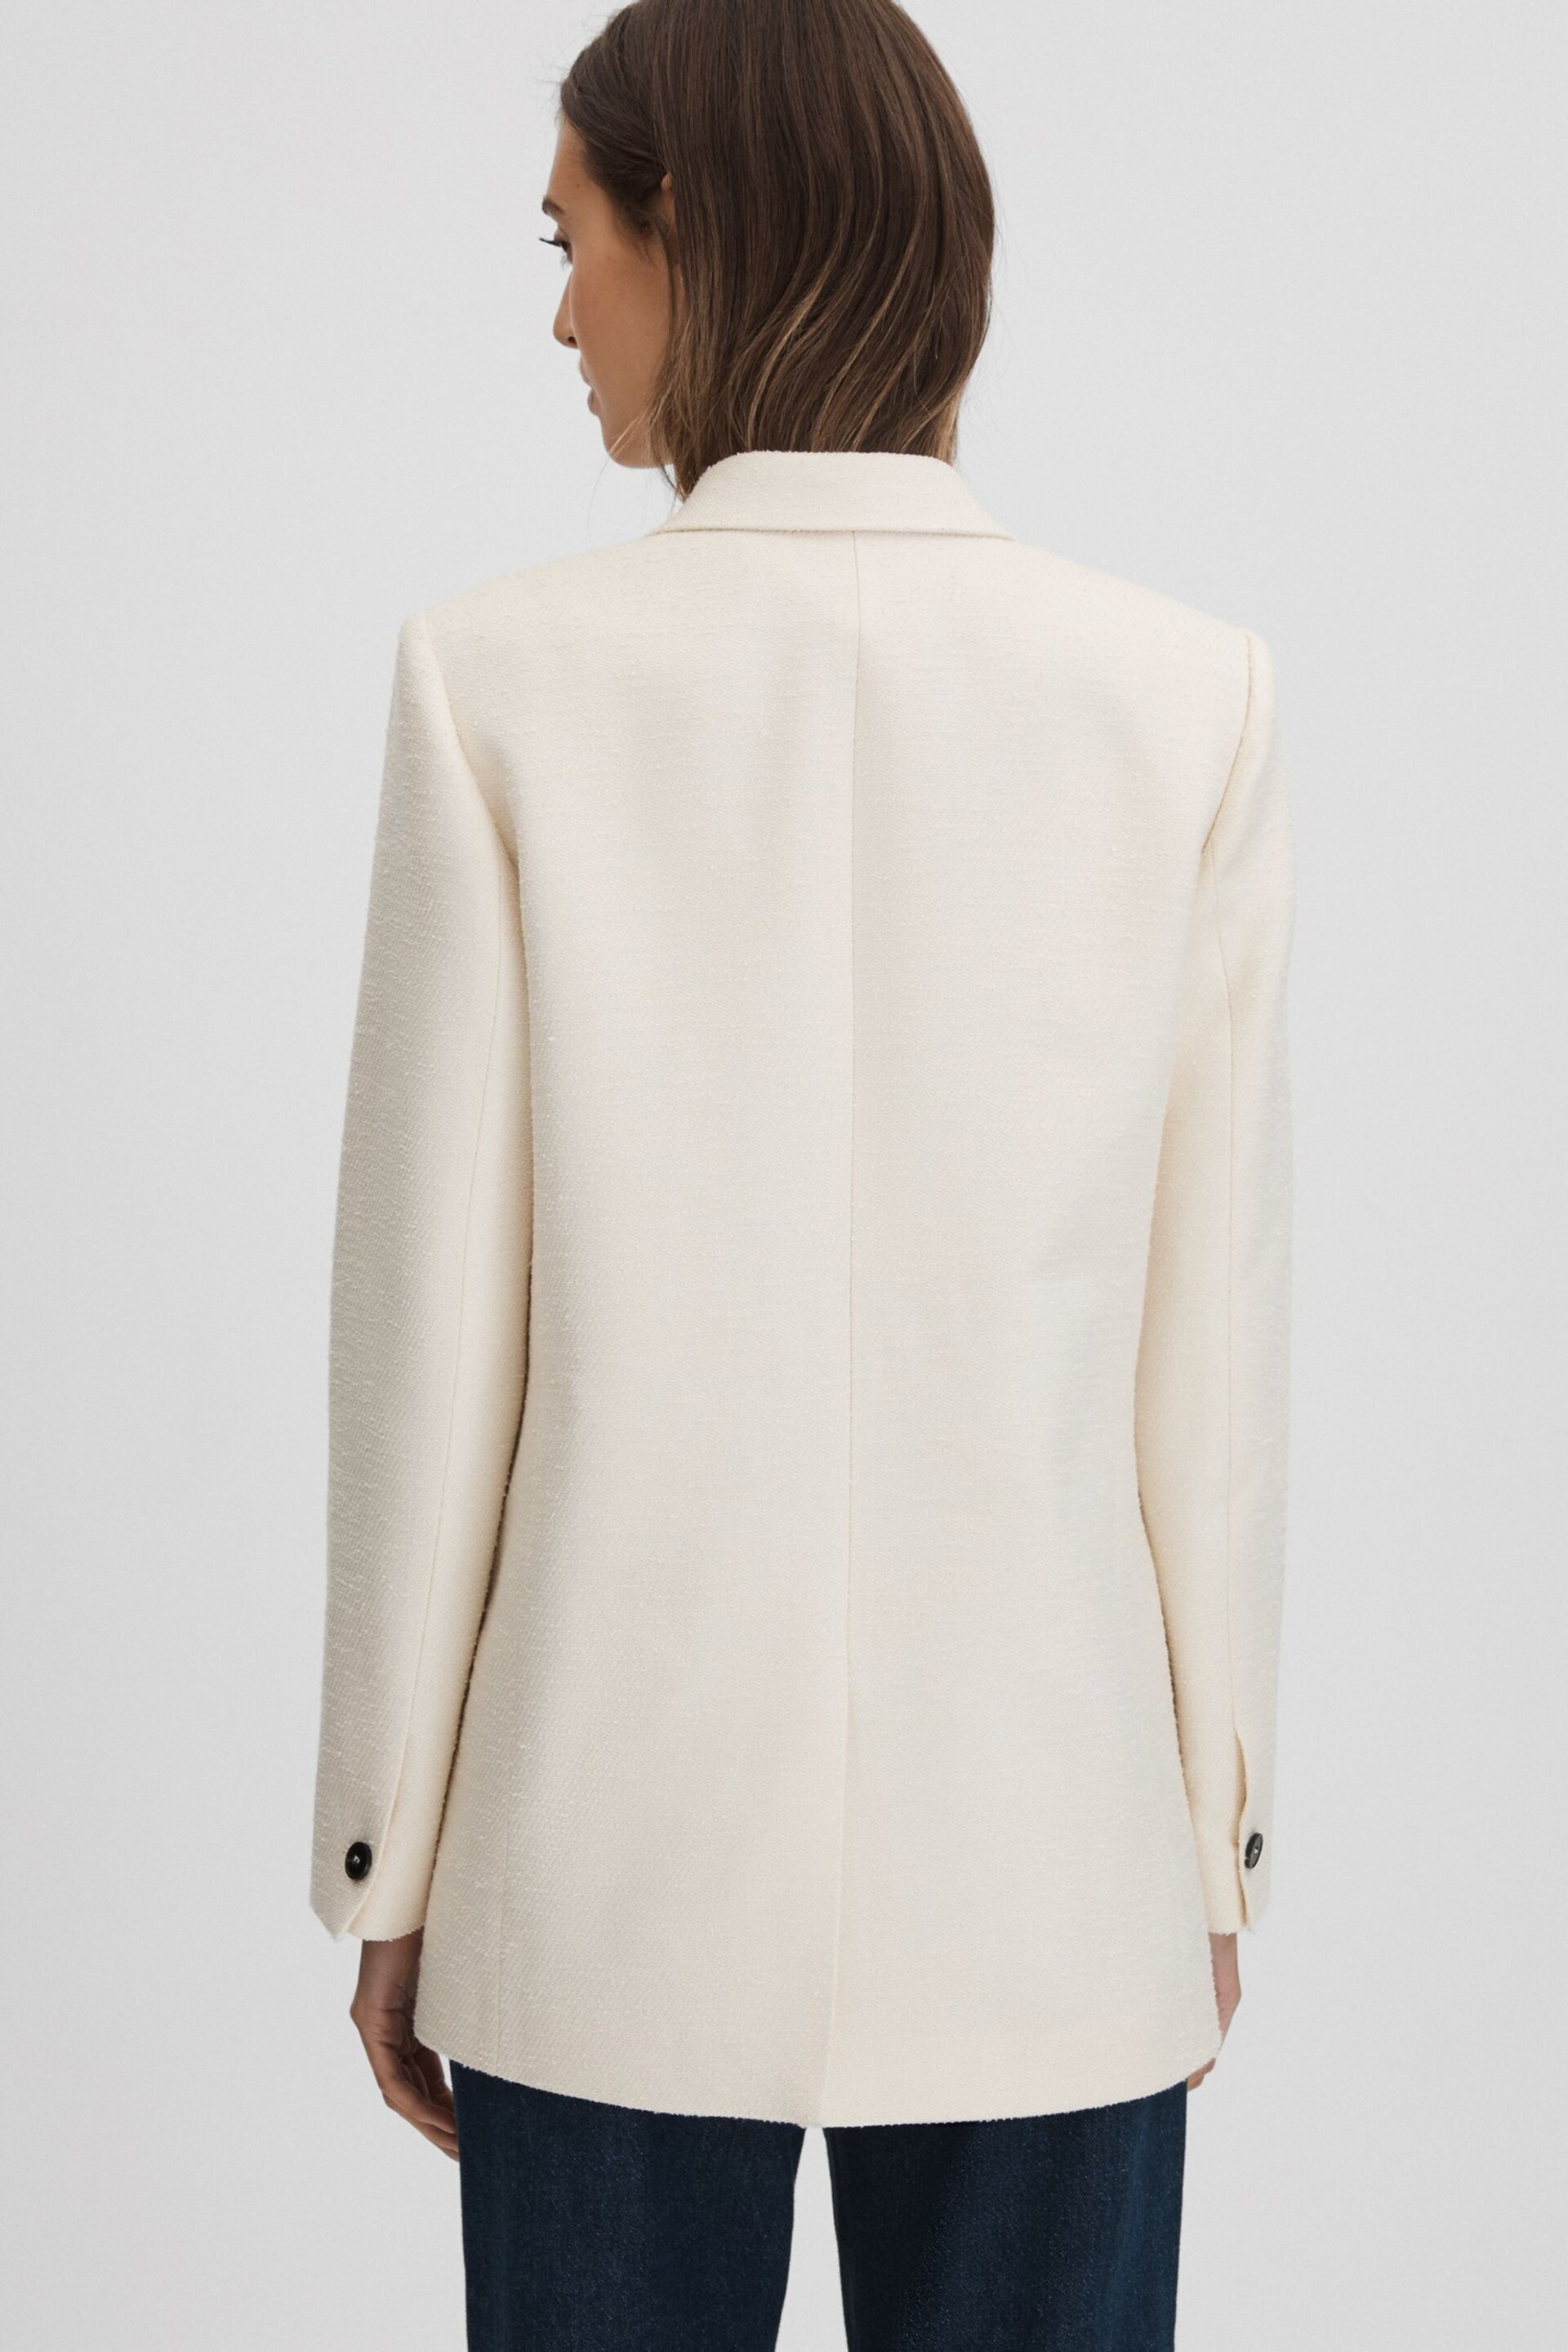 Reiss White Bronte Textured Double Breasted Blazer - Image 5 of 6